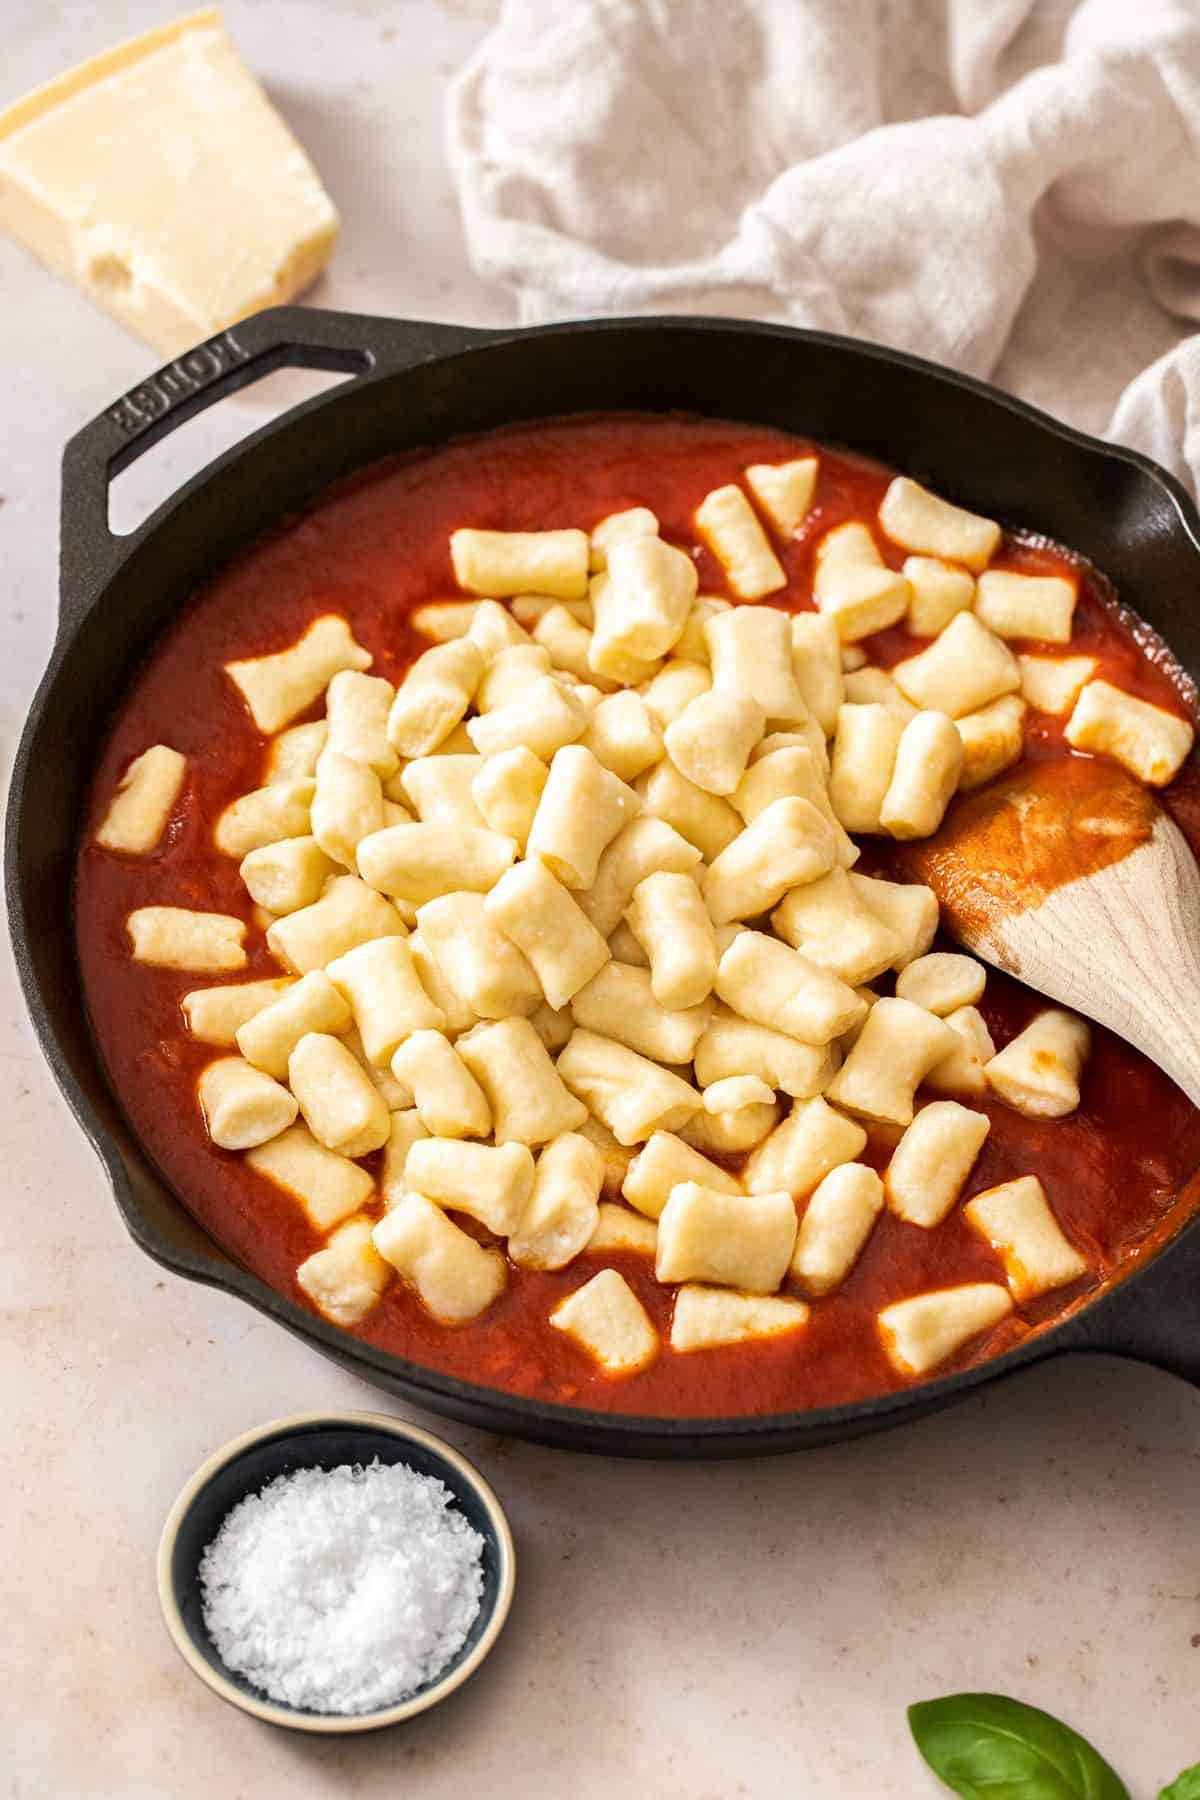 Skillet with a tomato sauce and the ricotta gnocchi sitting on top, with a wooden spoon about to combine them.